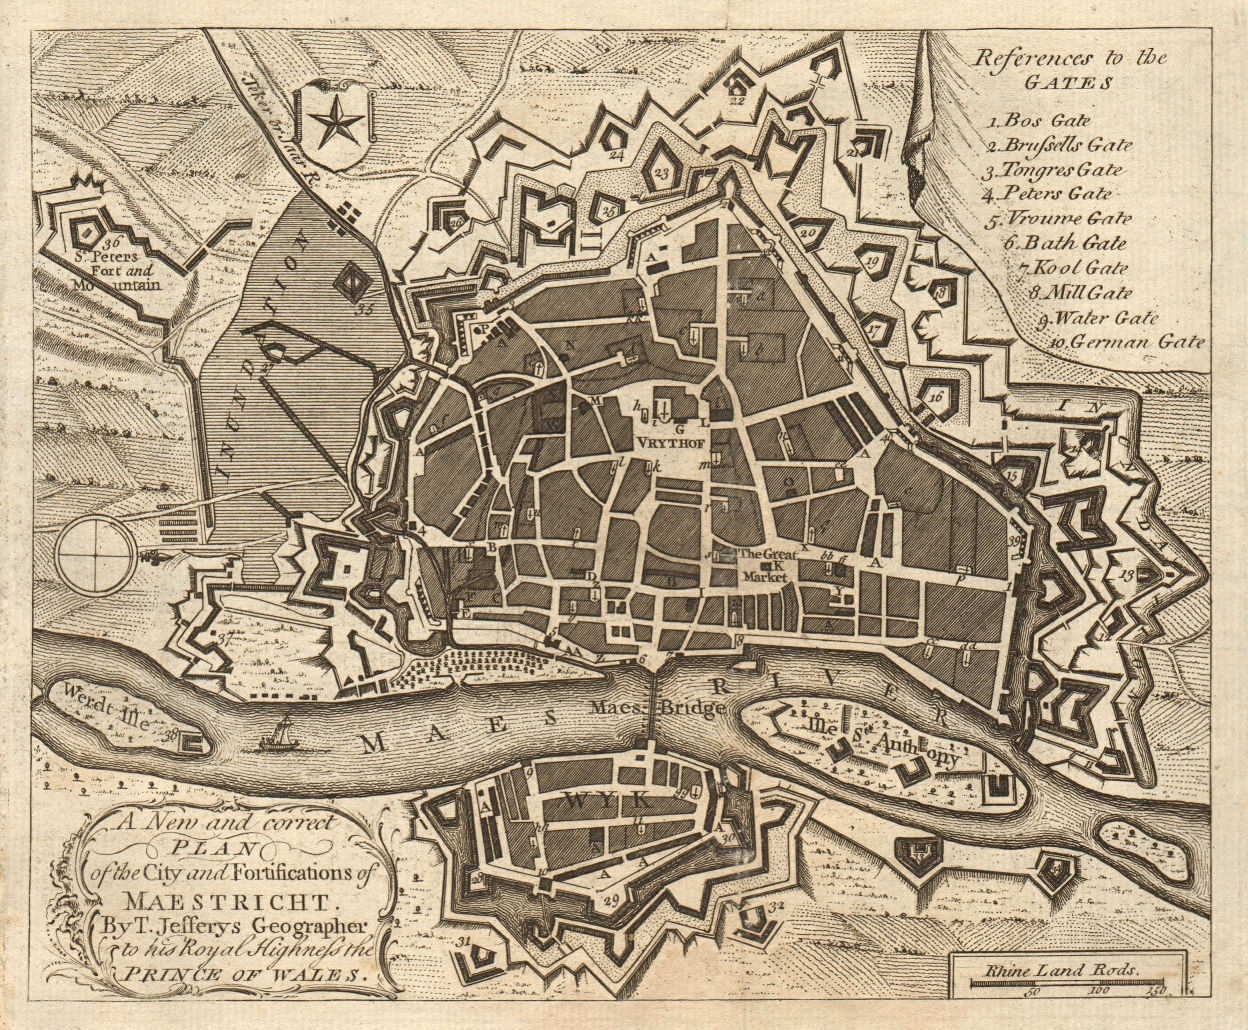 Plan of the city and fortifications of Maestricht. Maastricht. JEFFERYS 1748 map